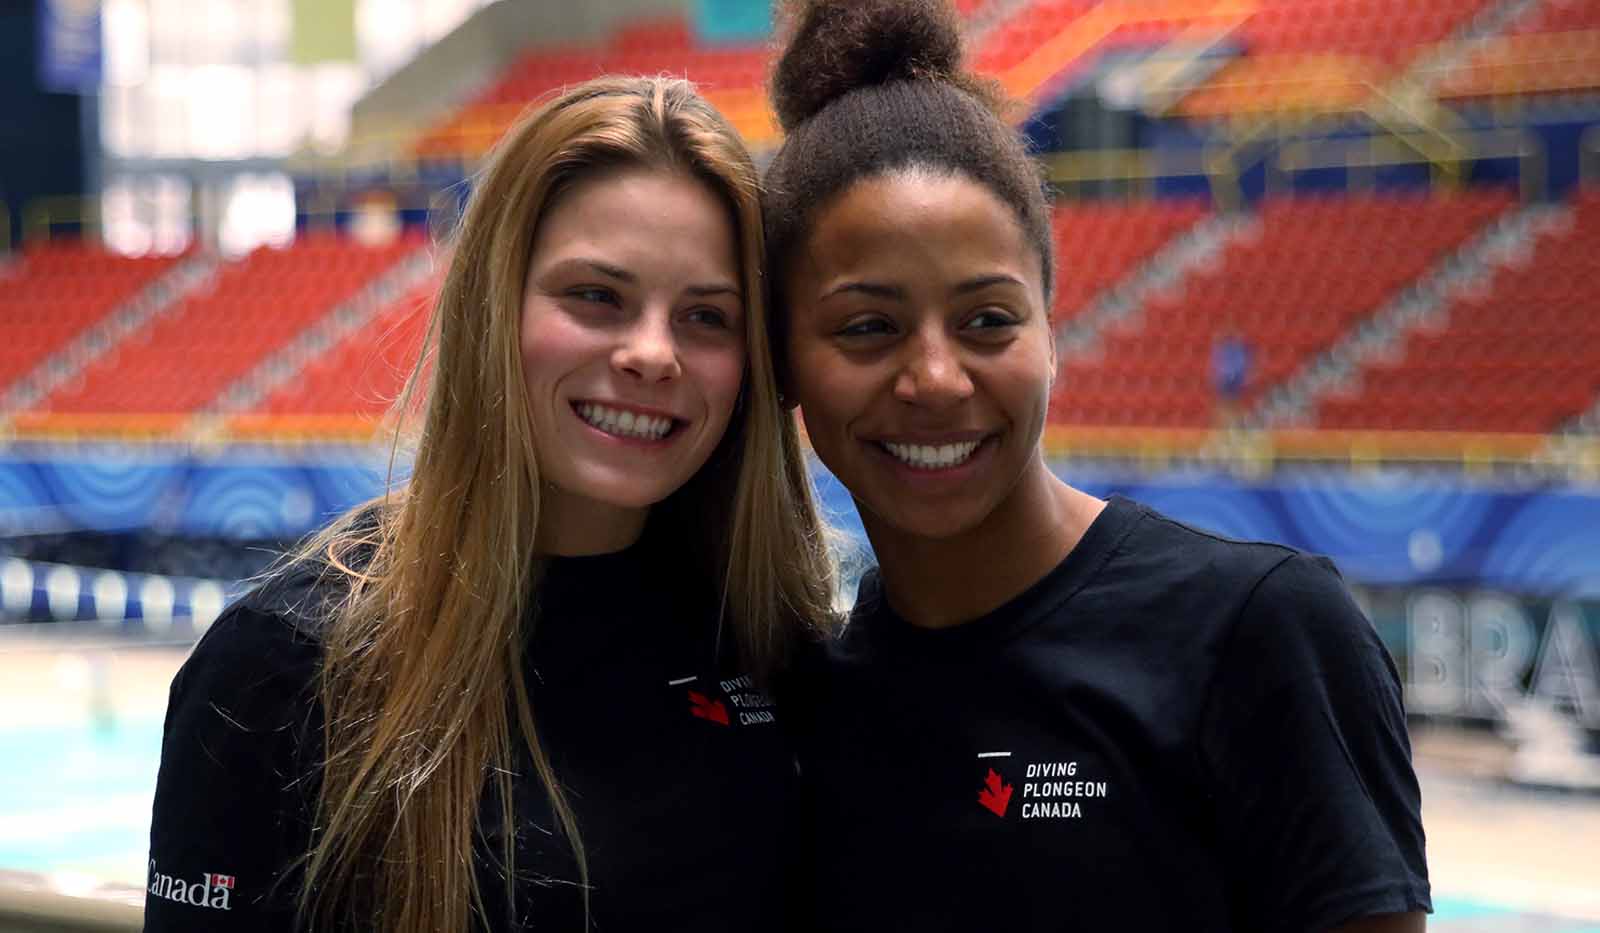 Diving Plongeon Canada kicks off the 2019 season by unveiling the federation’s new brand identity